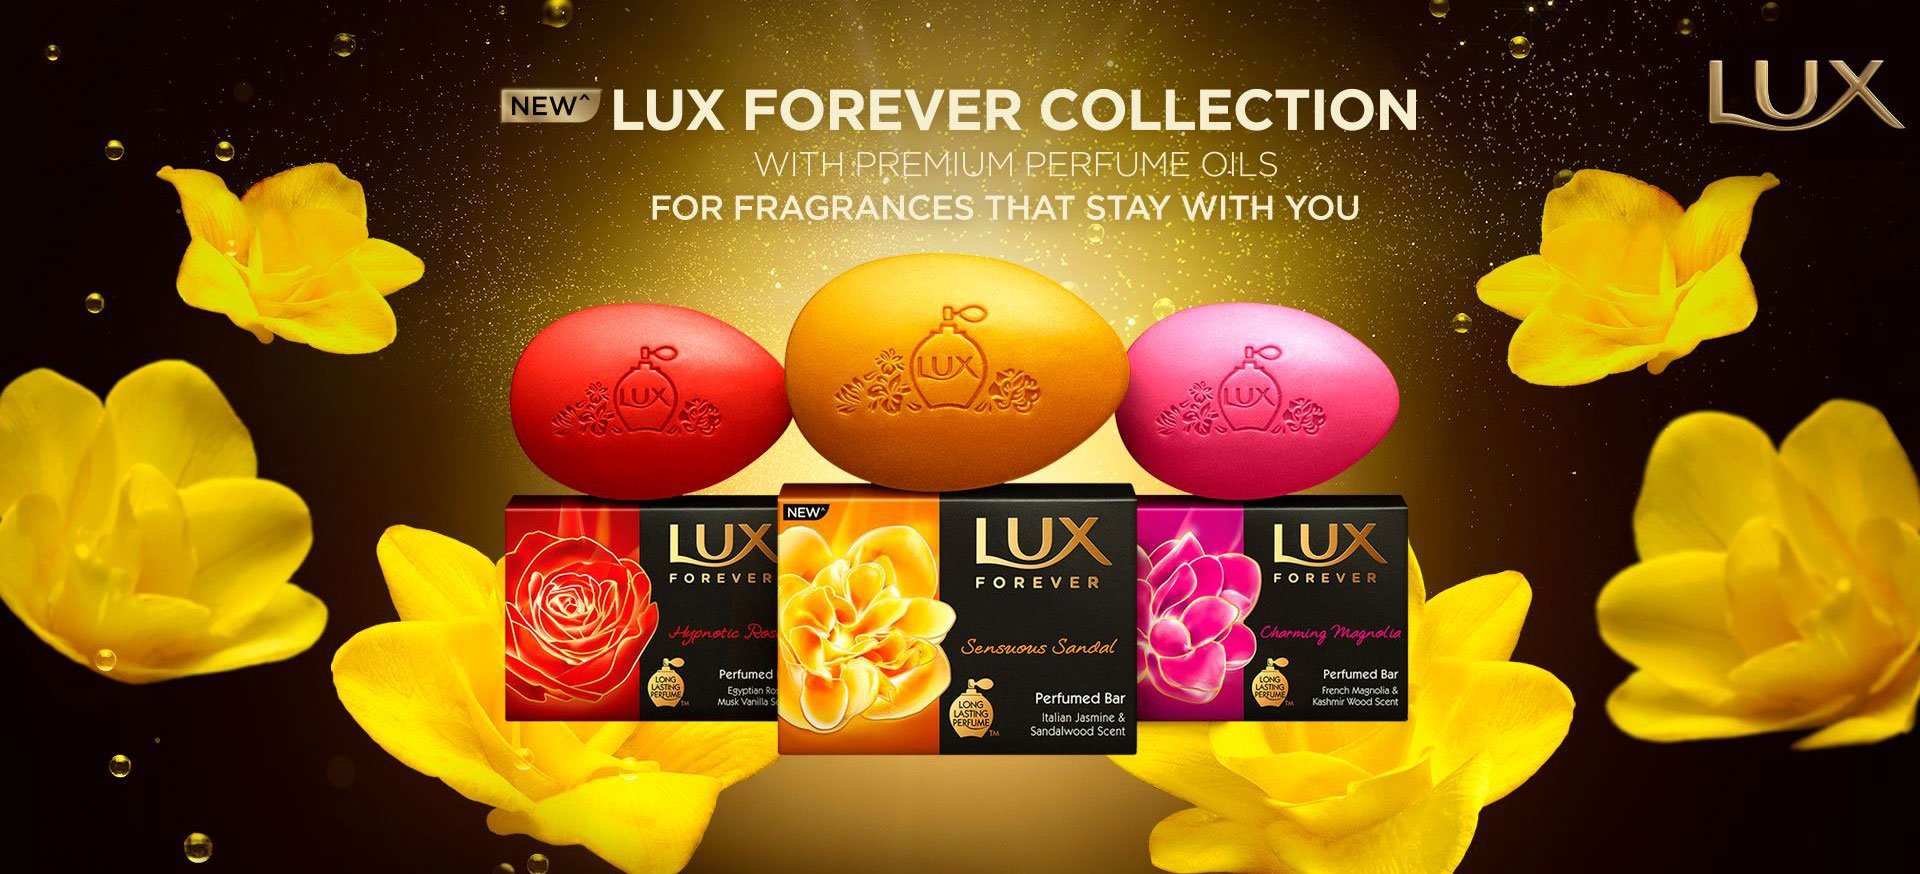 Lux Sandal Collection with premium perfume oils, For Fragrances that stay with you